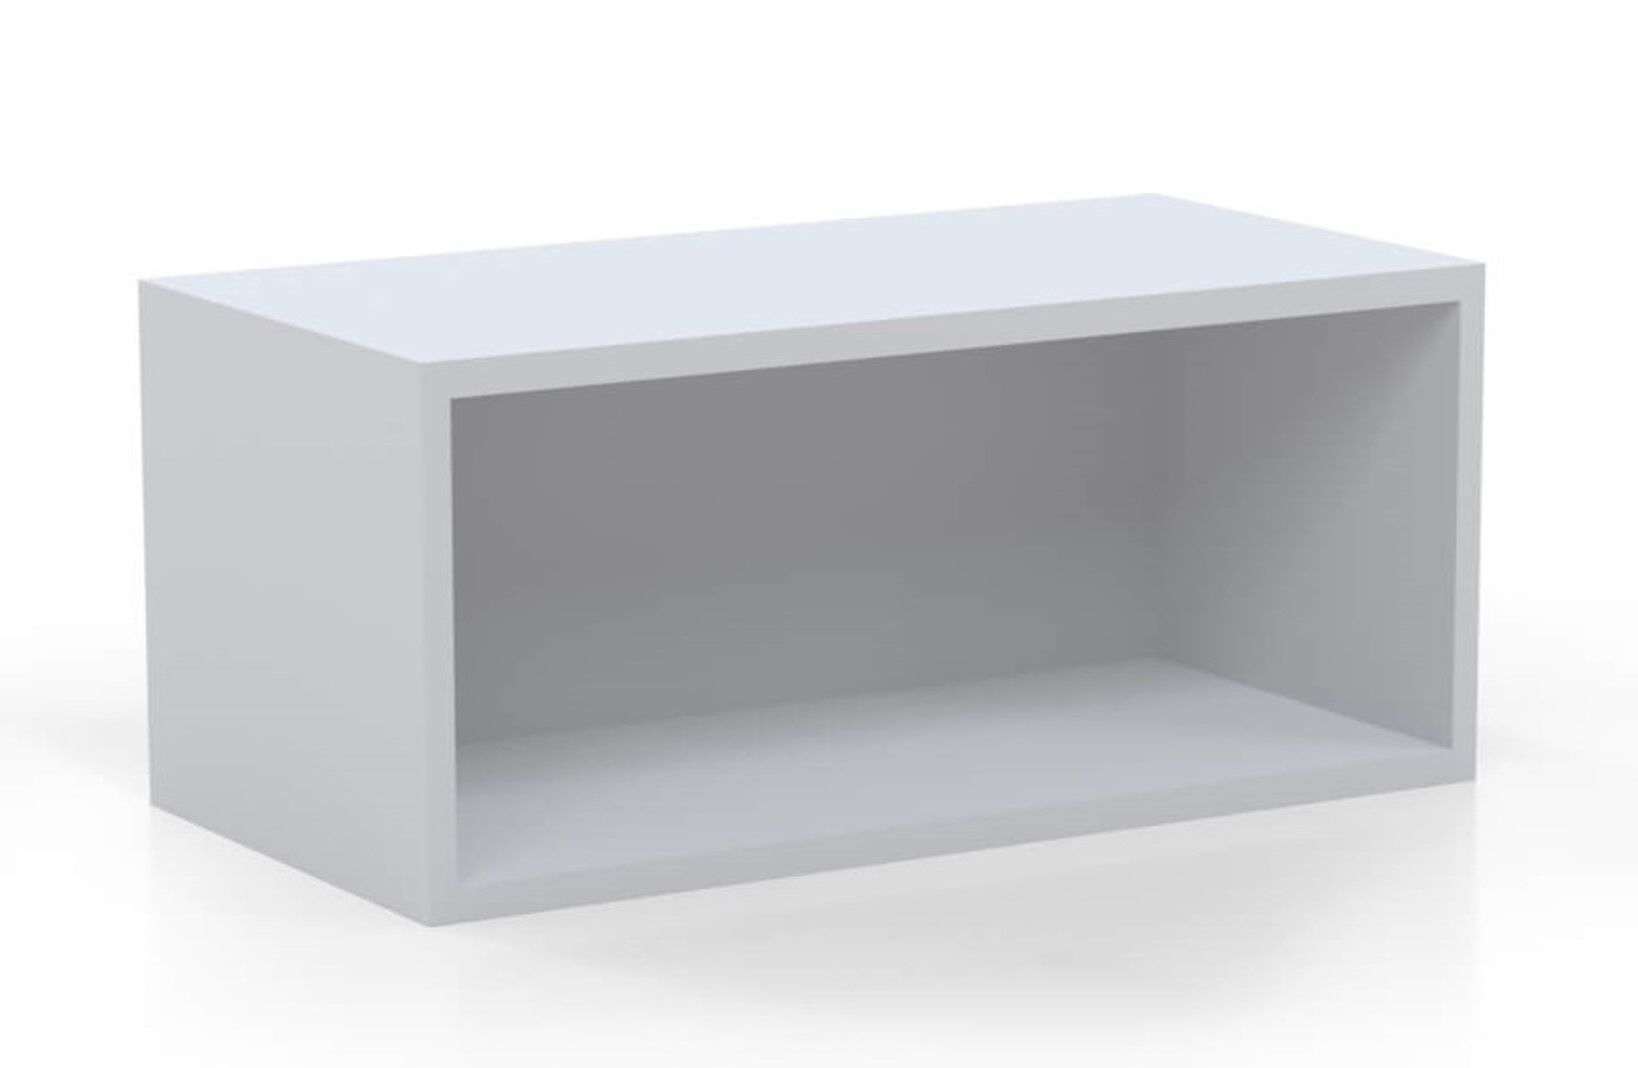 Lshaped desk with side storage wall mount hutch white_preview